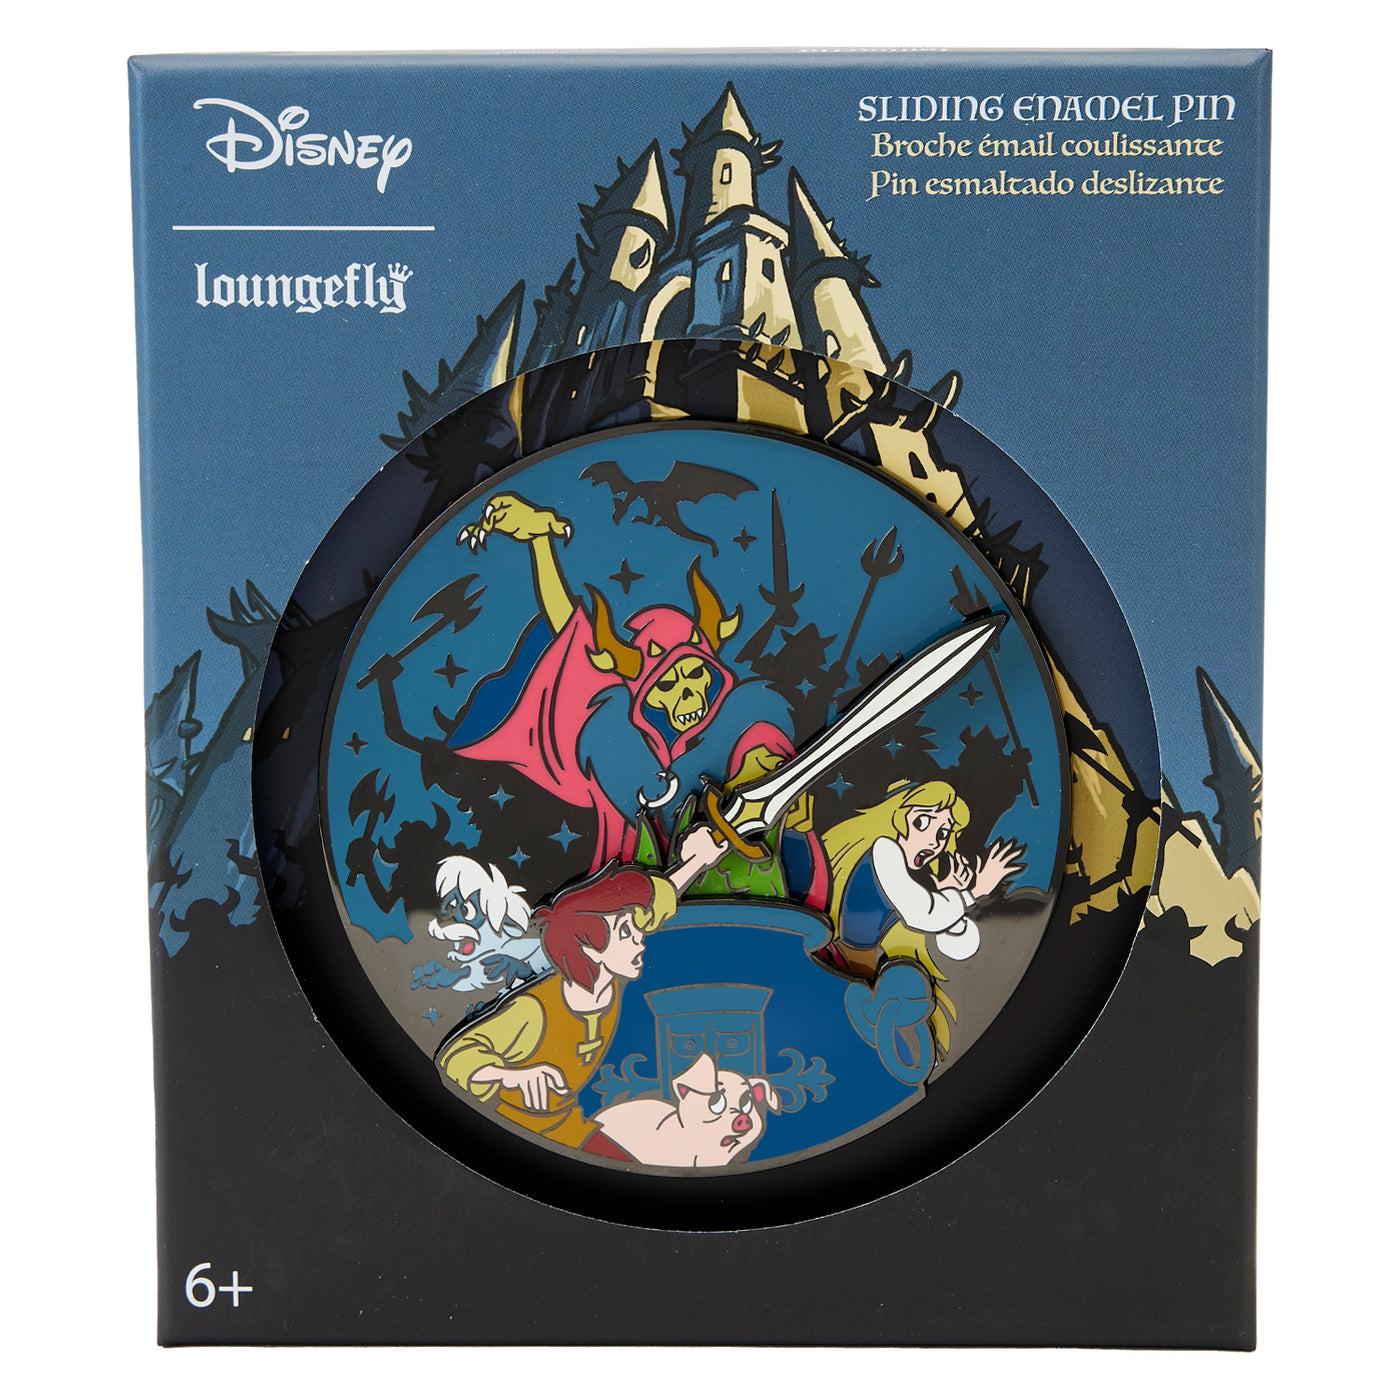 Disney The Black Cauldron Glow in the Dark 3" Collector's Box Pin Limited Edition